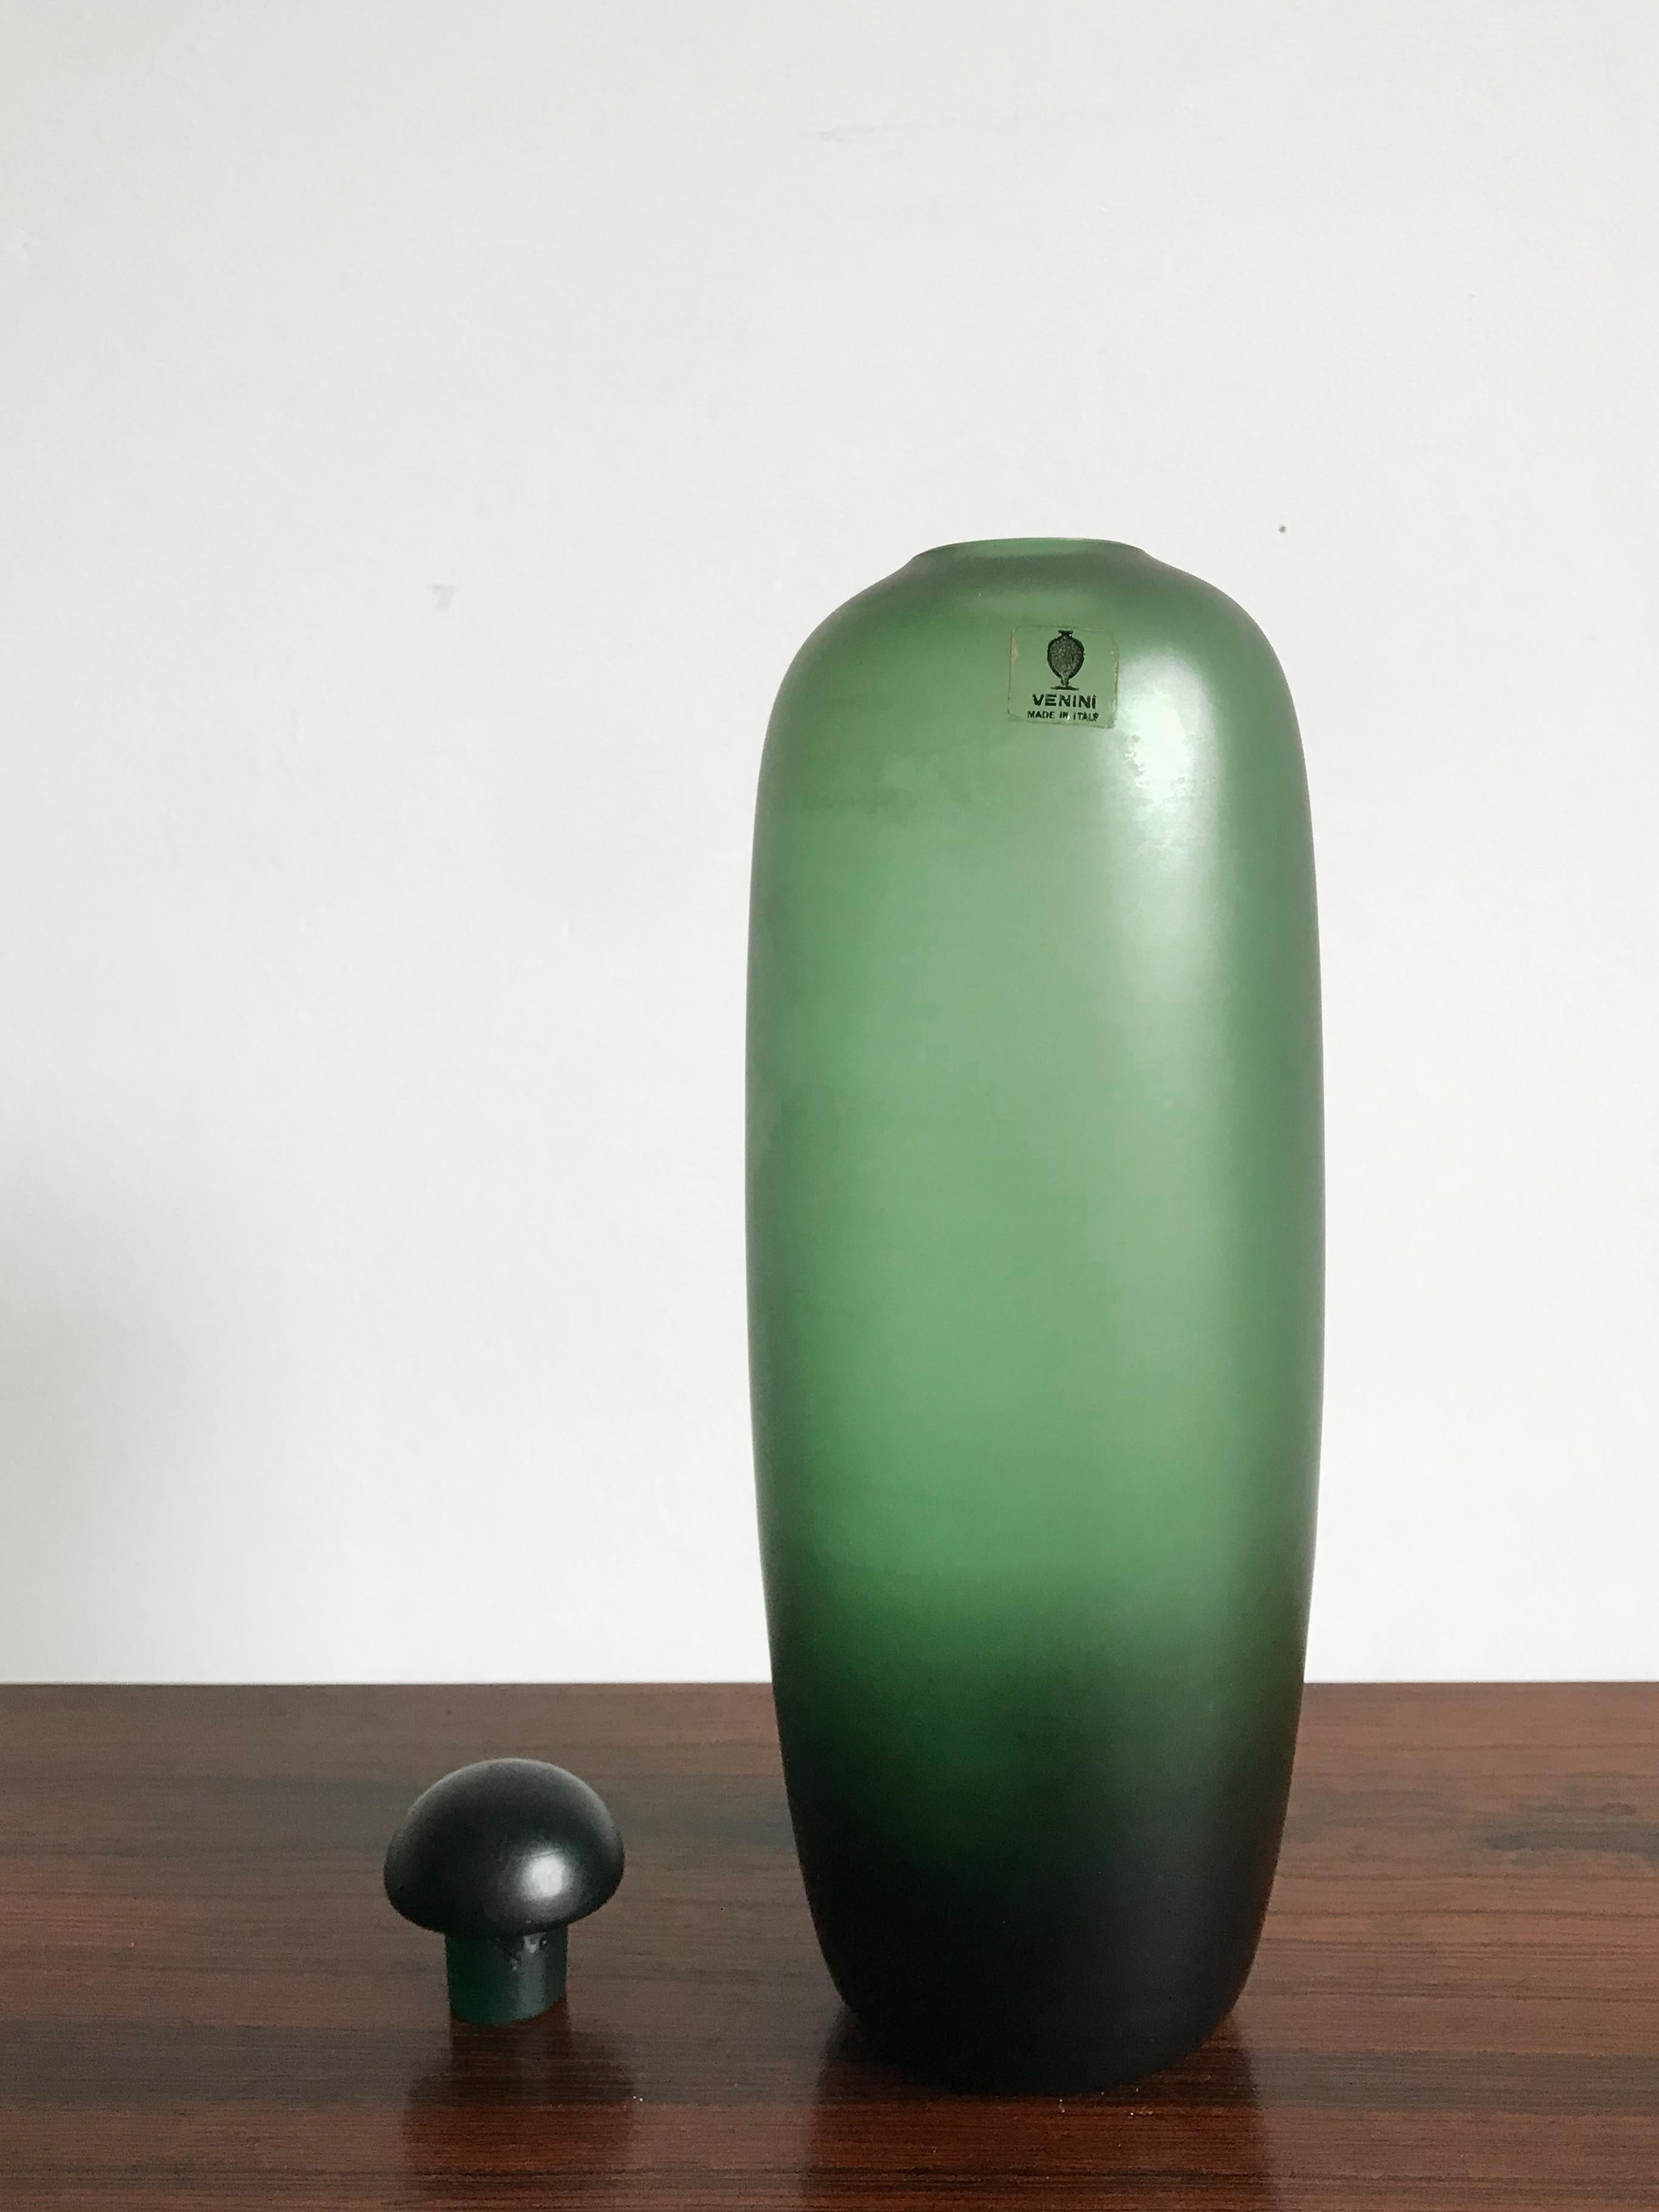 Amazing and fabulous Italian handmade and blown bottle in green color glass with stopper, from the “Velati” series designed and produced by Venini Murano in 1981.

Original Venini Murano label Made in Italy and engraved by the producer on the